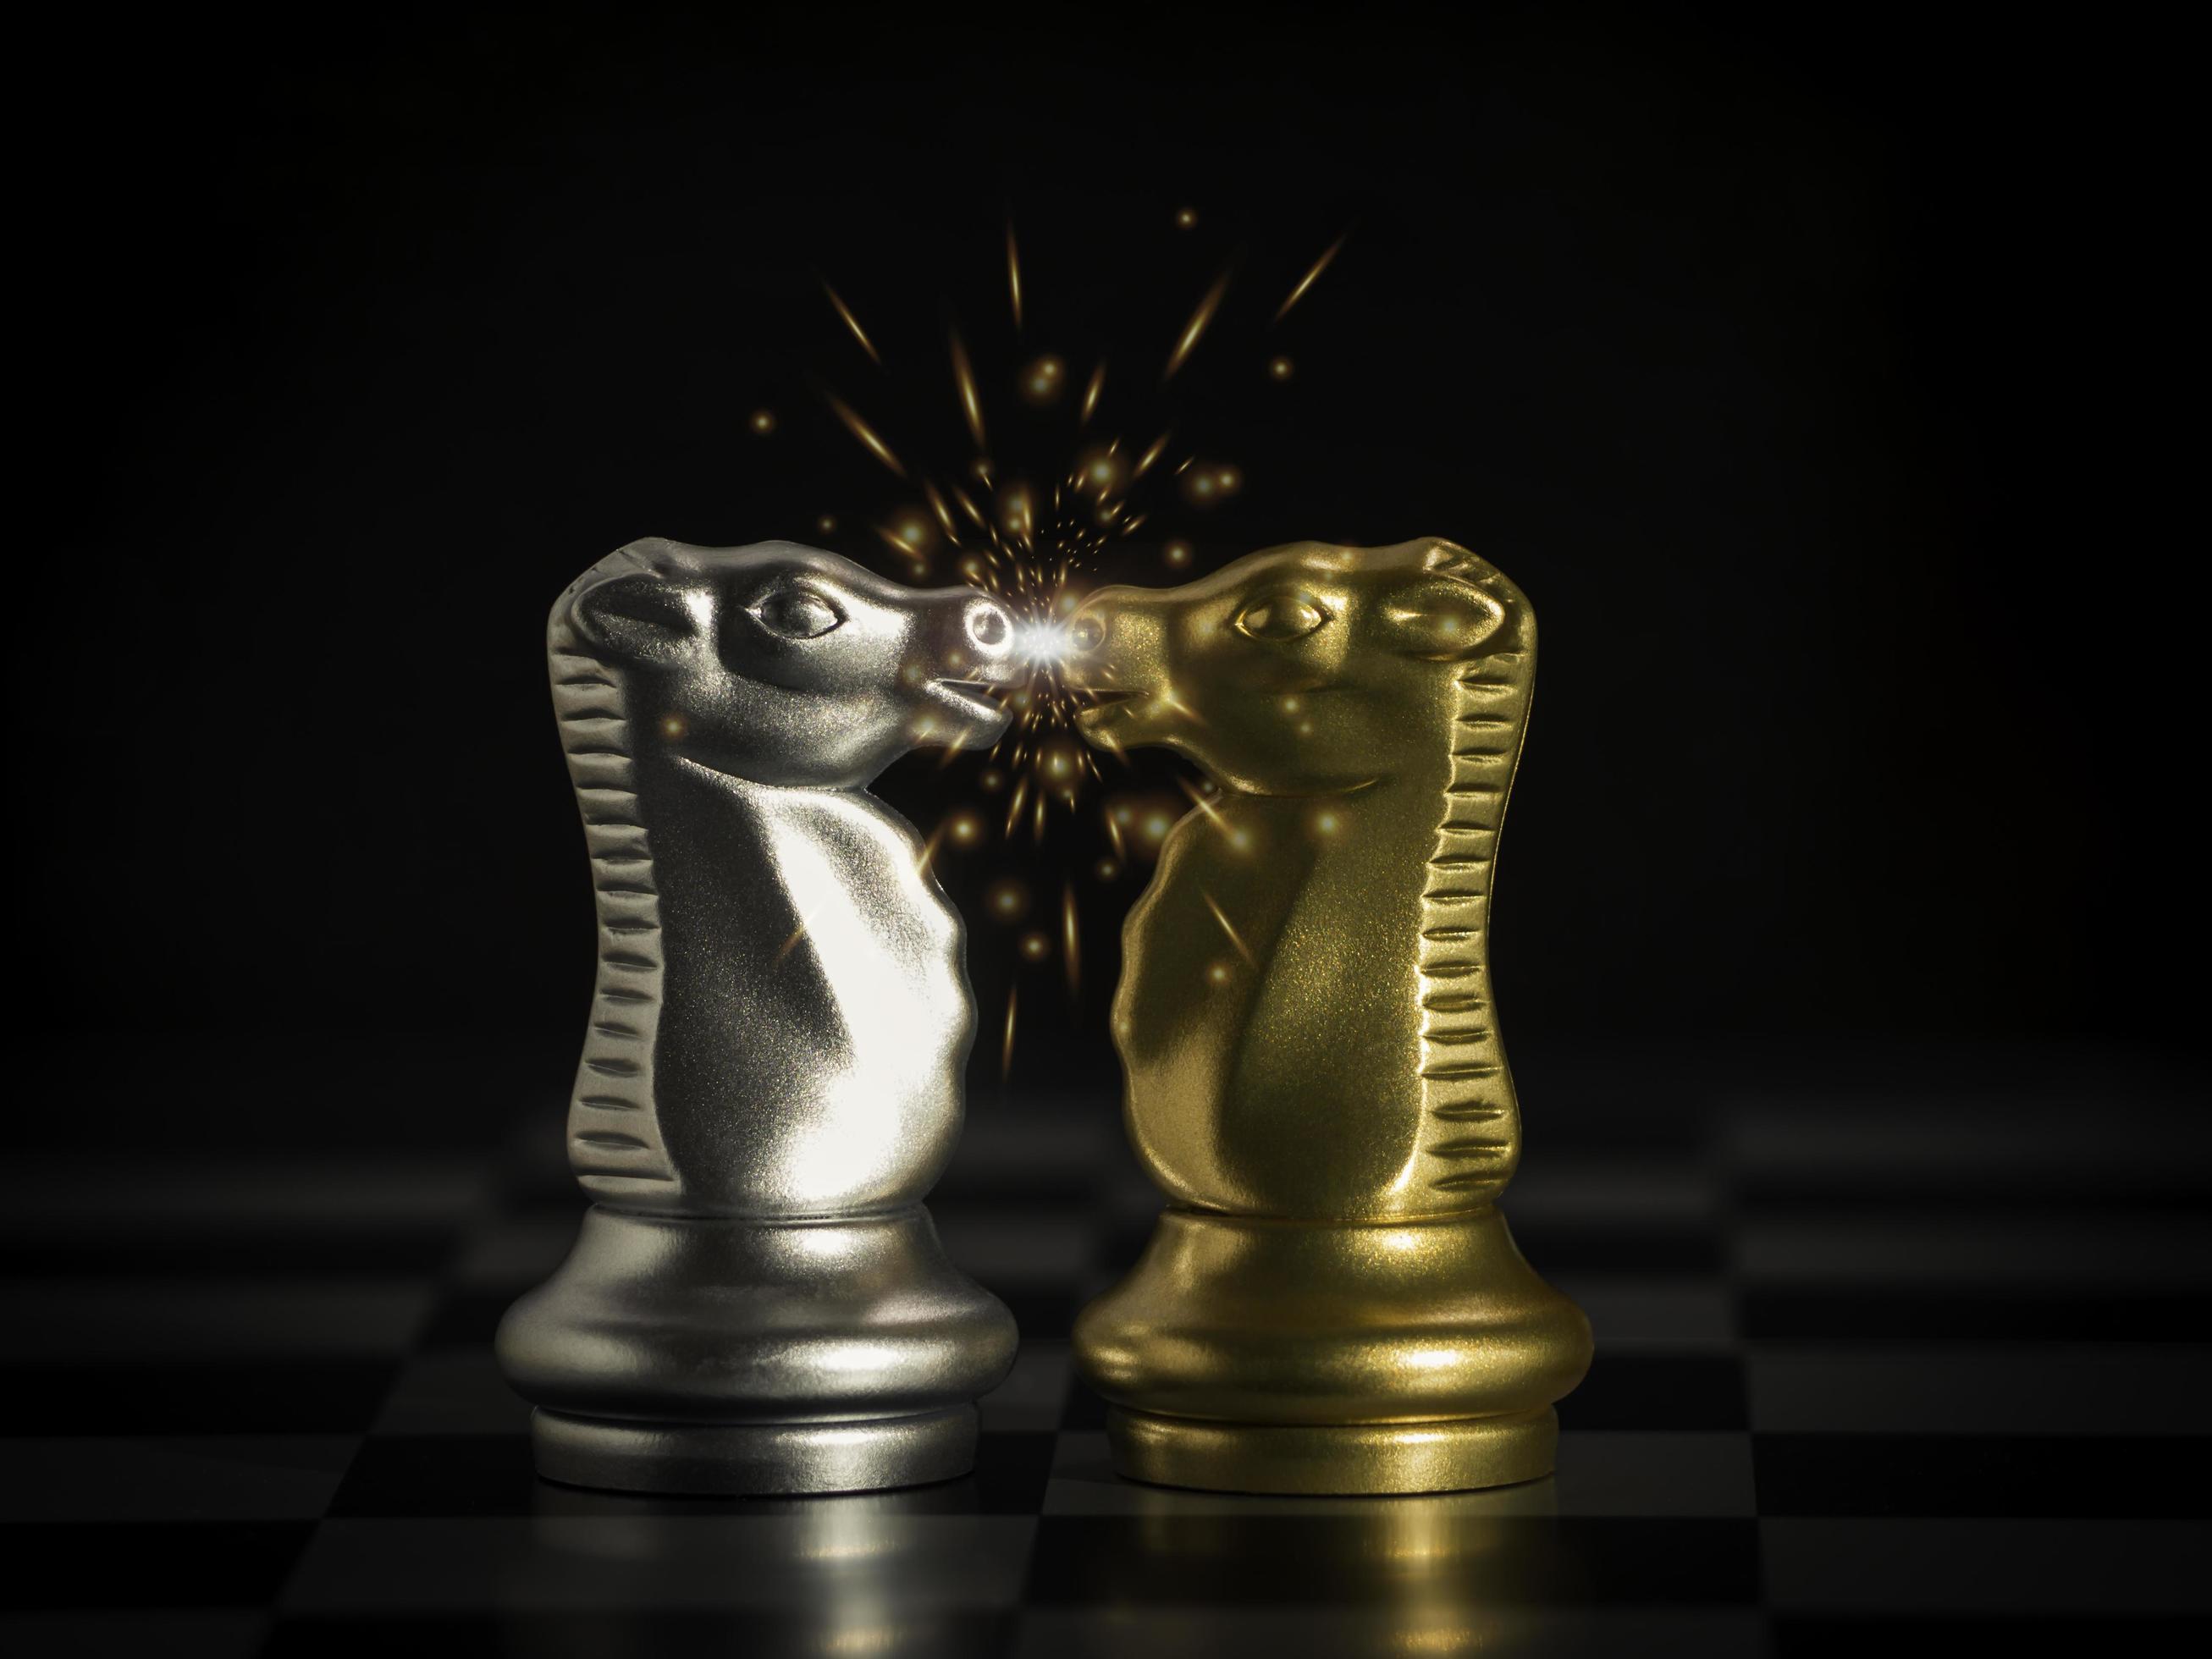 Gold knight chess facing silver knight chess with red hot flying sparks fire on chess board. Business leader market target strategy. business competition success, strategy ideas